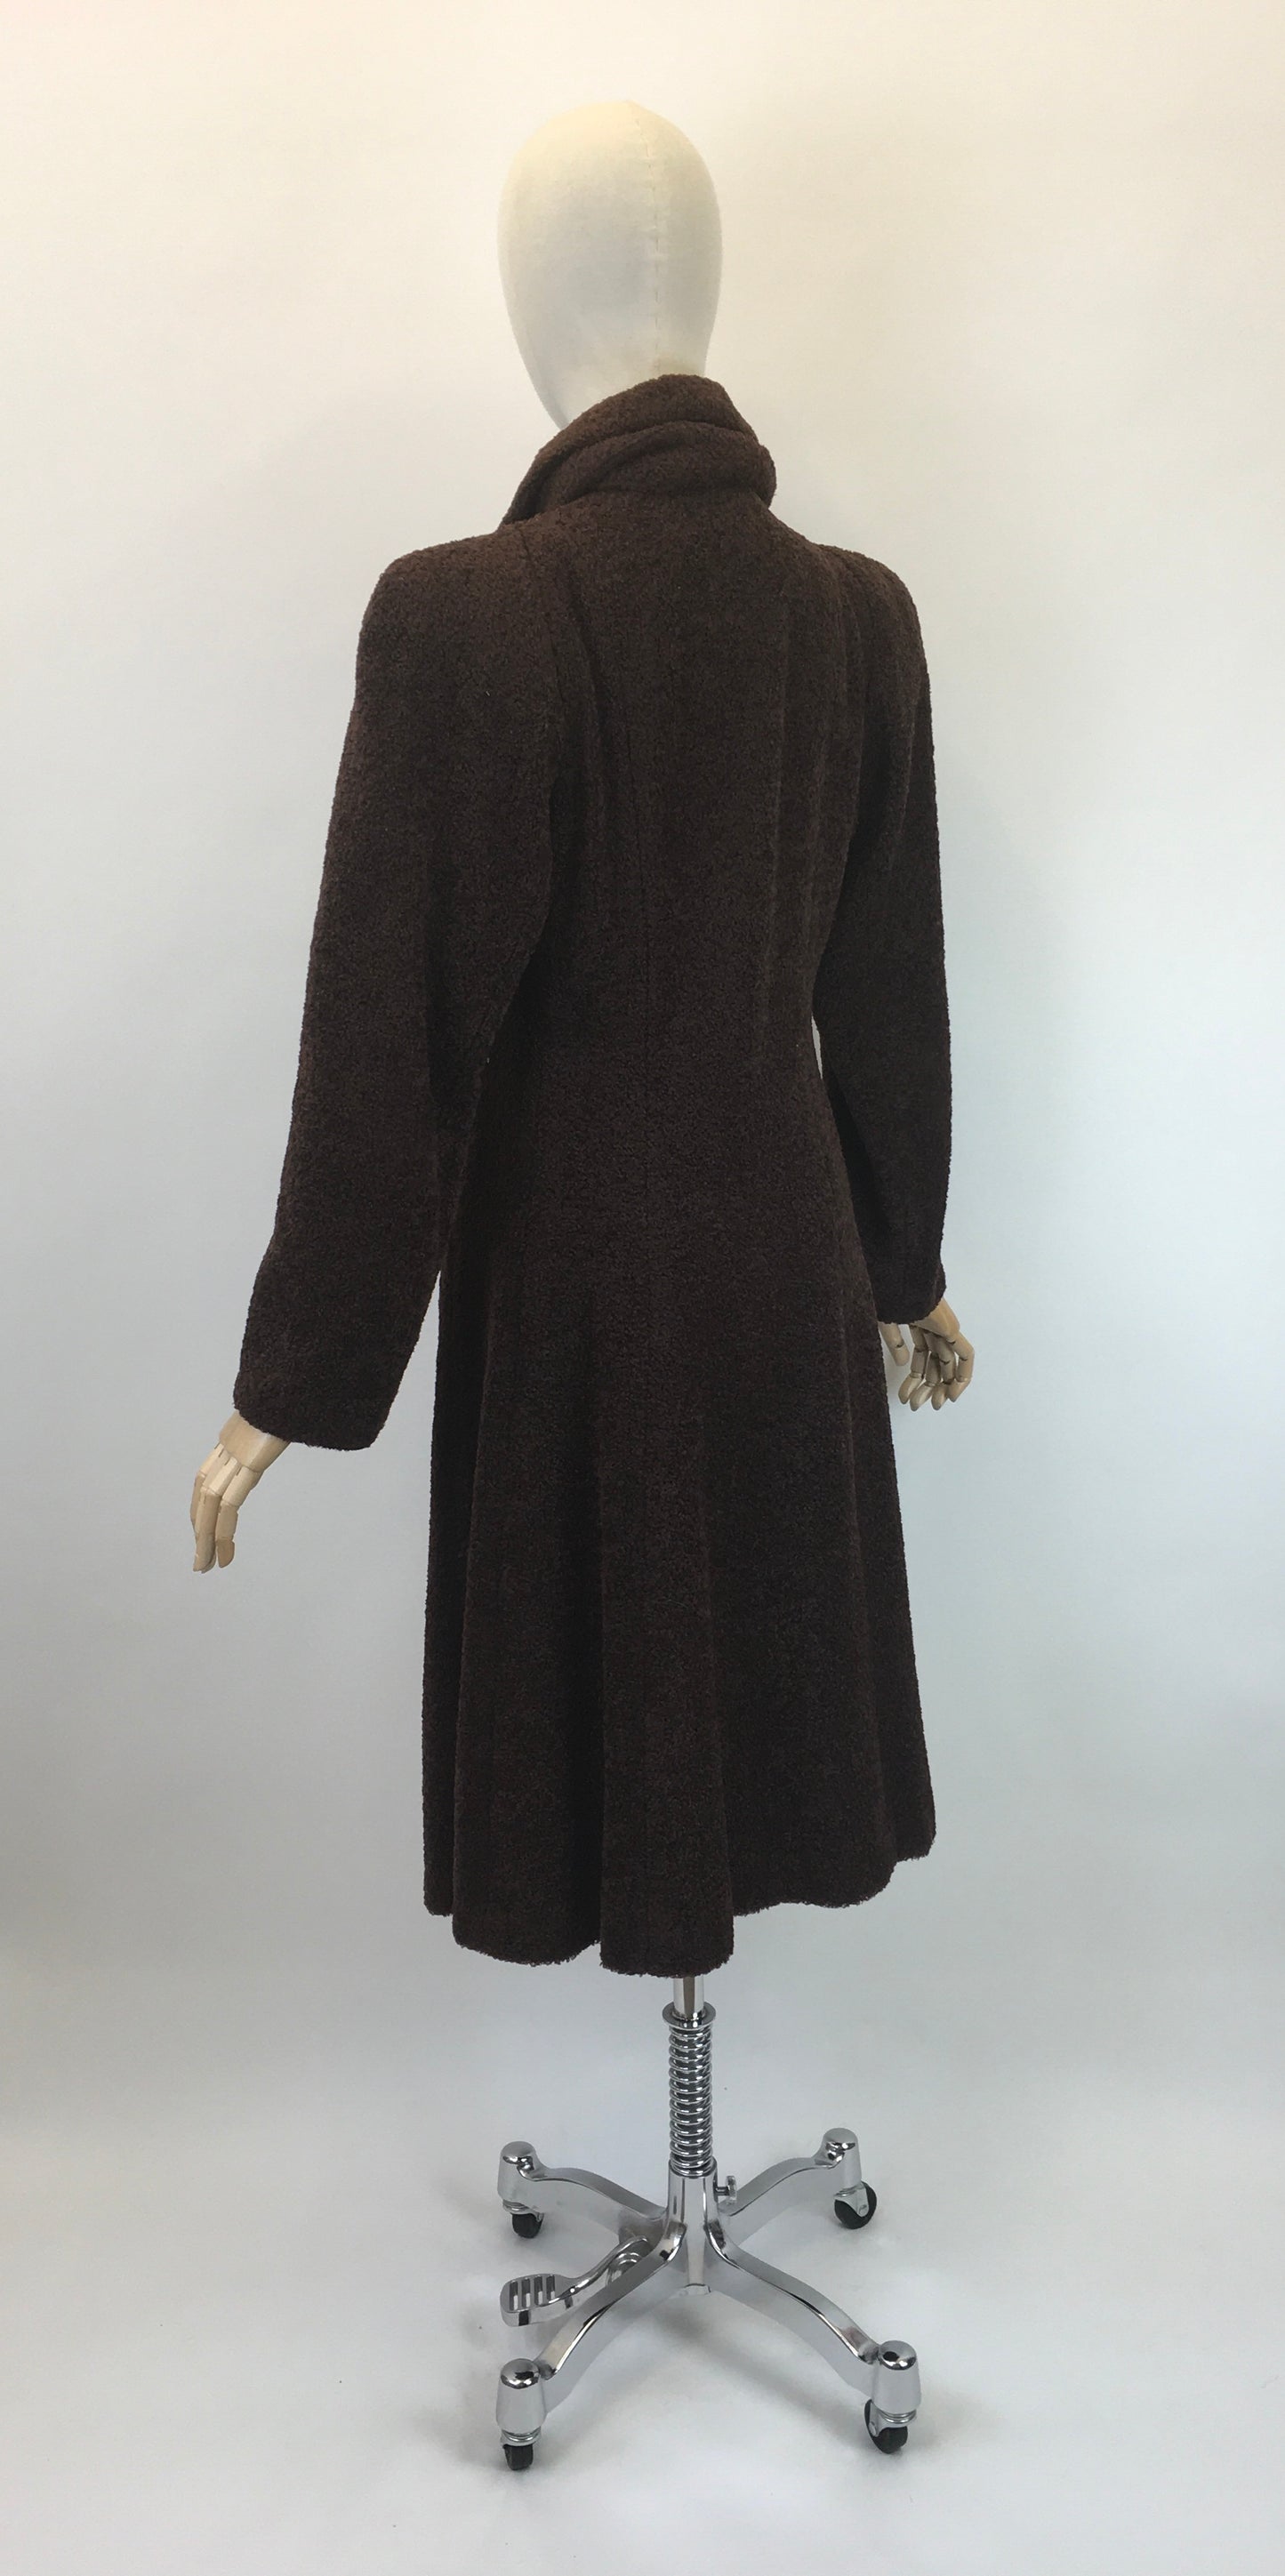 Original 1940’s Stunning Faux Fur Coat - With Matching Scarf in Dark Brown